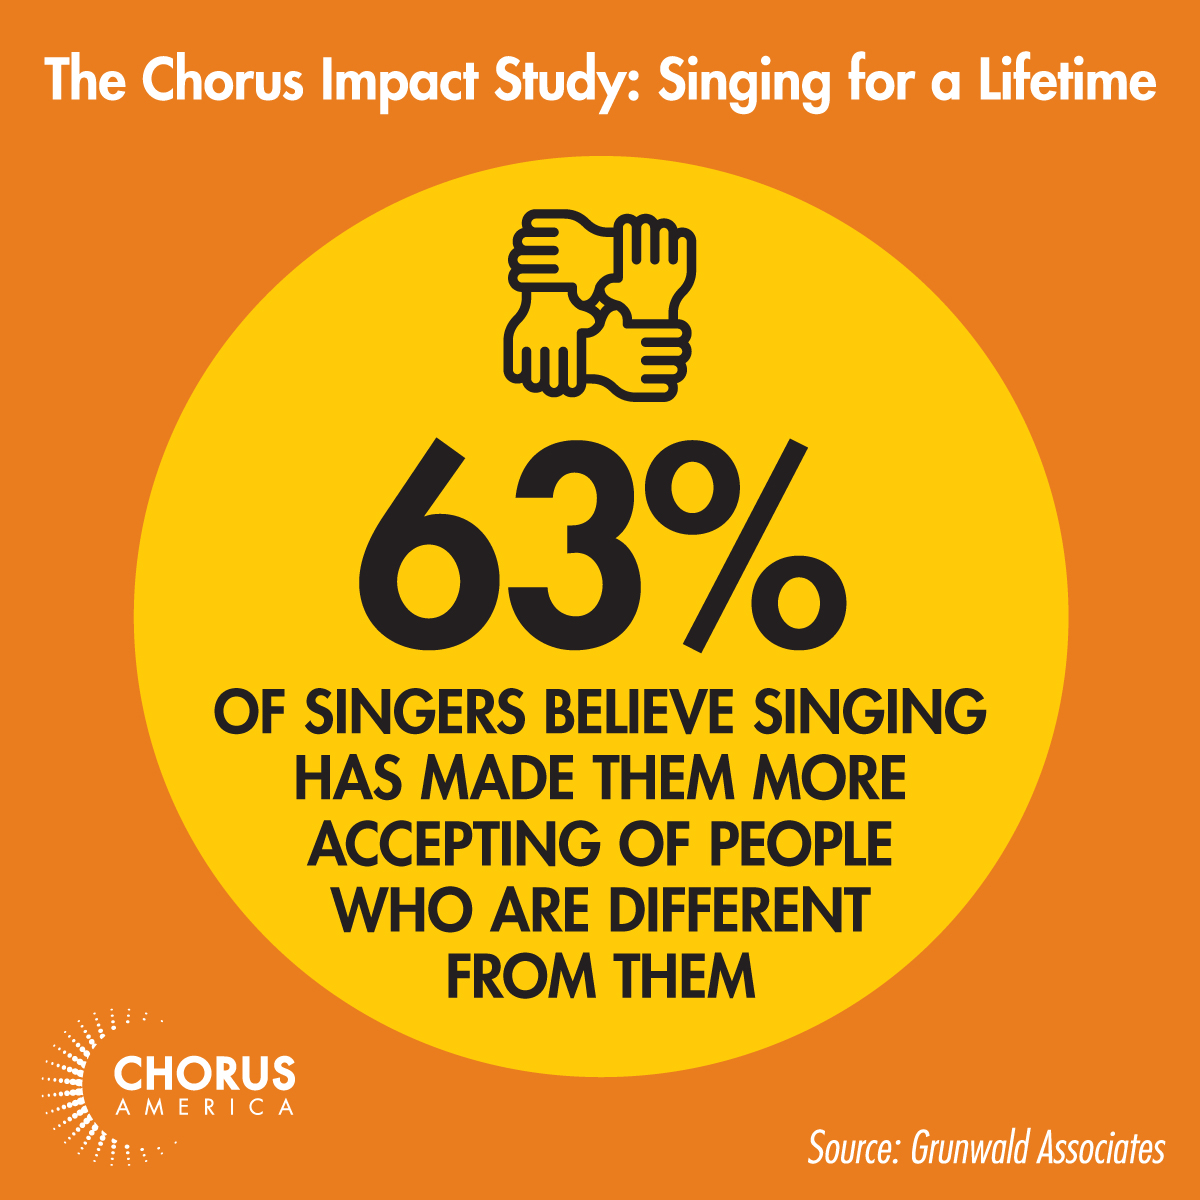 Chorus Impact Study: 63% of singers believe singing has made them more accepting of people who are different from them